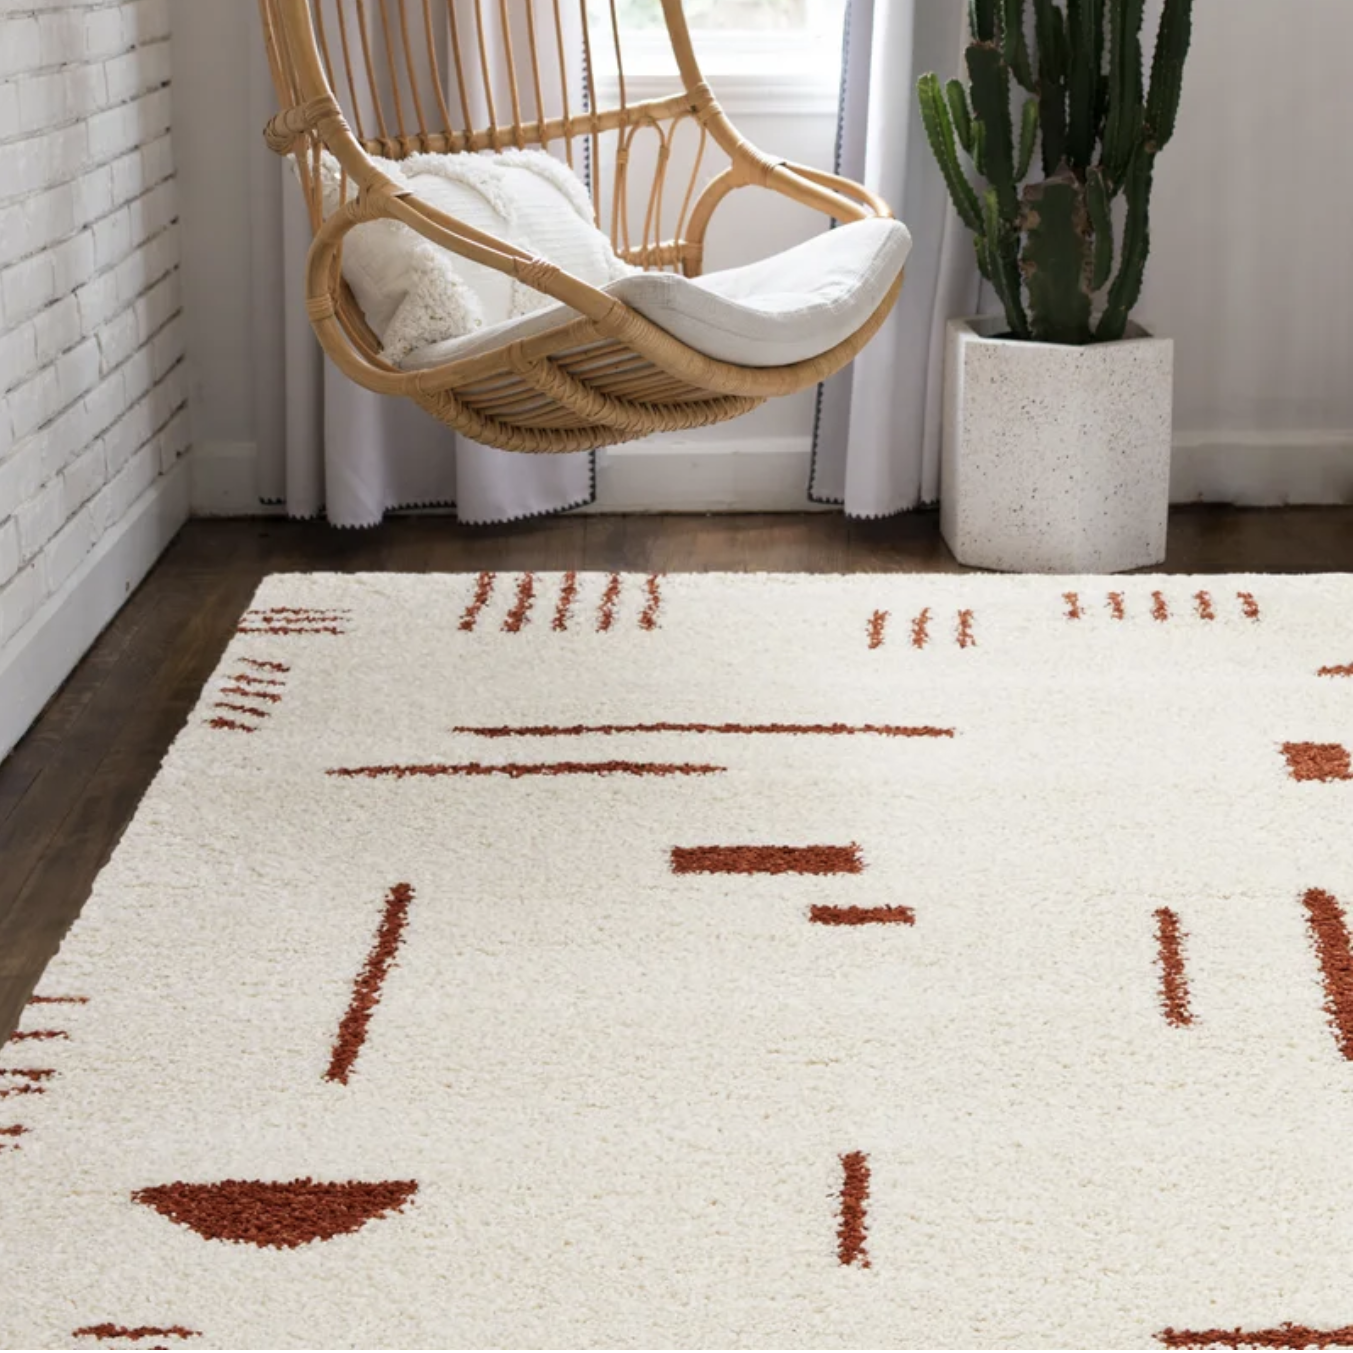 15 Best Places to Buy Cheap Rugs in 2022 - Stylish, Affordable Area Rugs